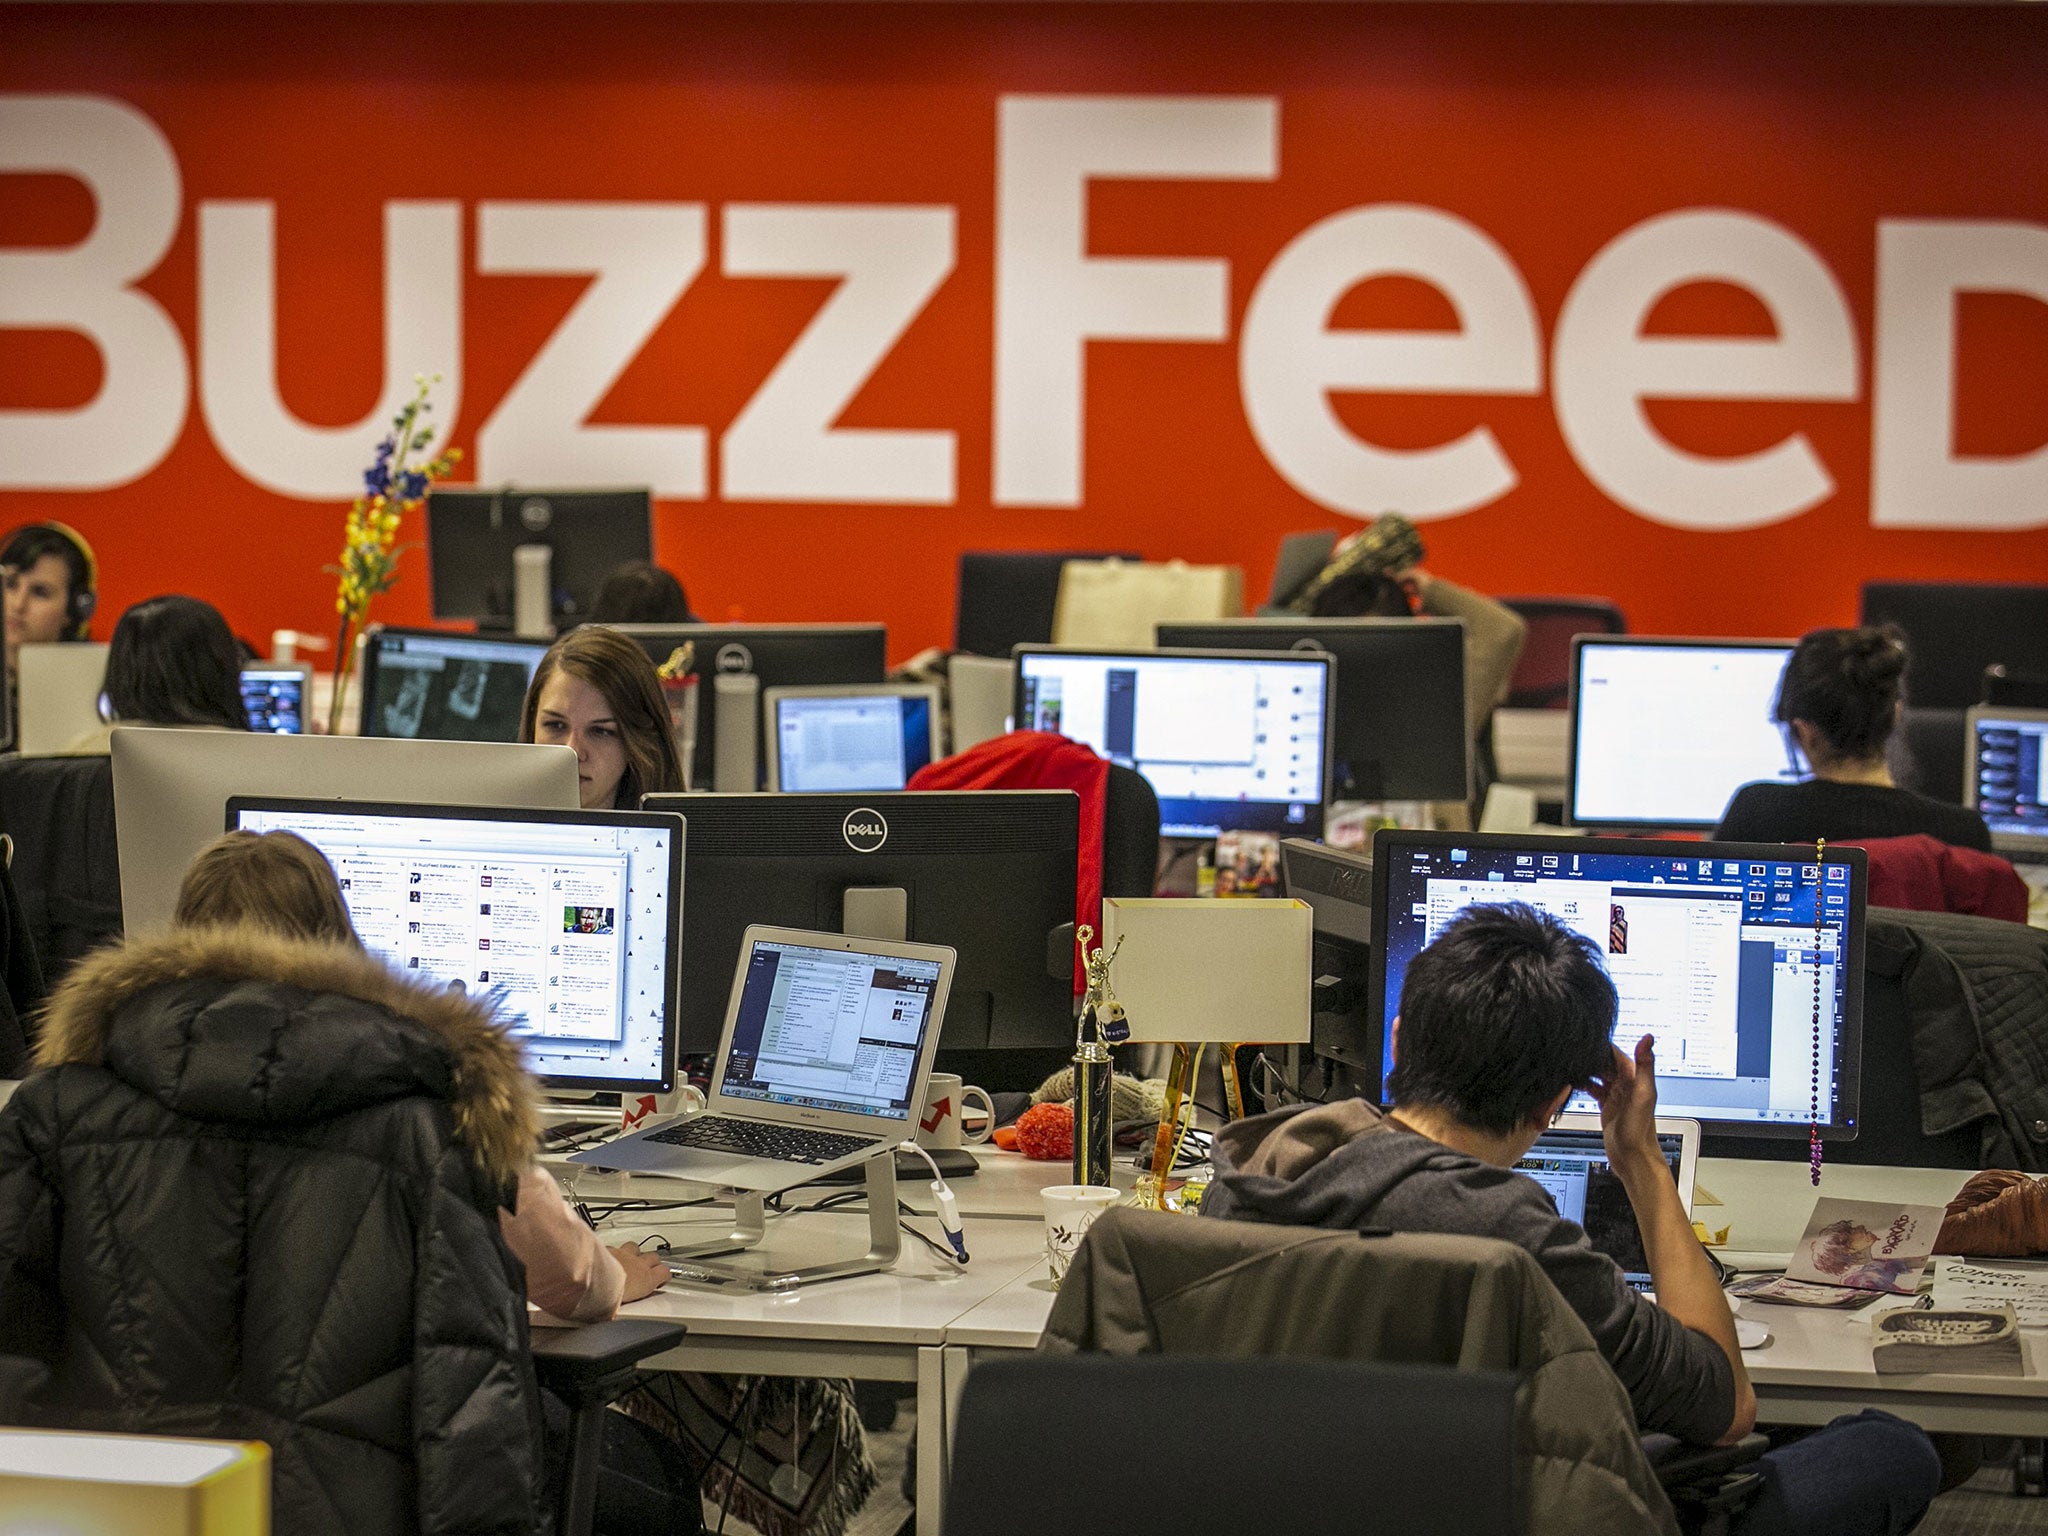 BuzzFeed, which has 900 employees, is expanding into tech business news, as it seeks to broaden its offering from viral news aggregation